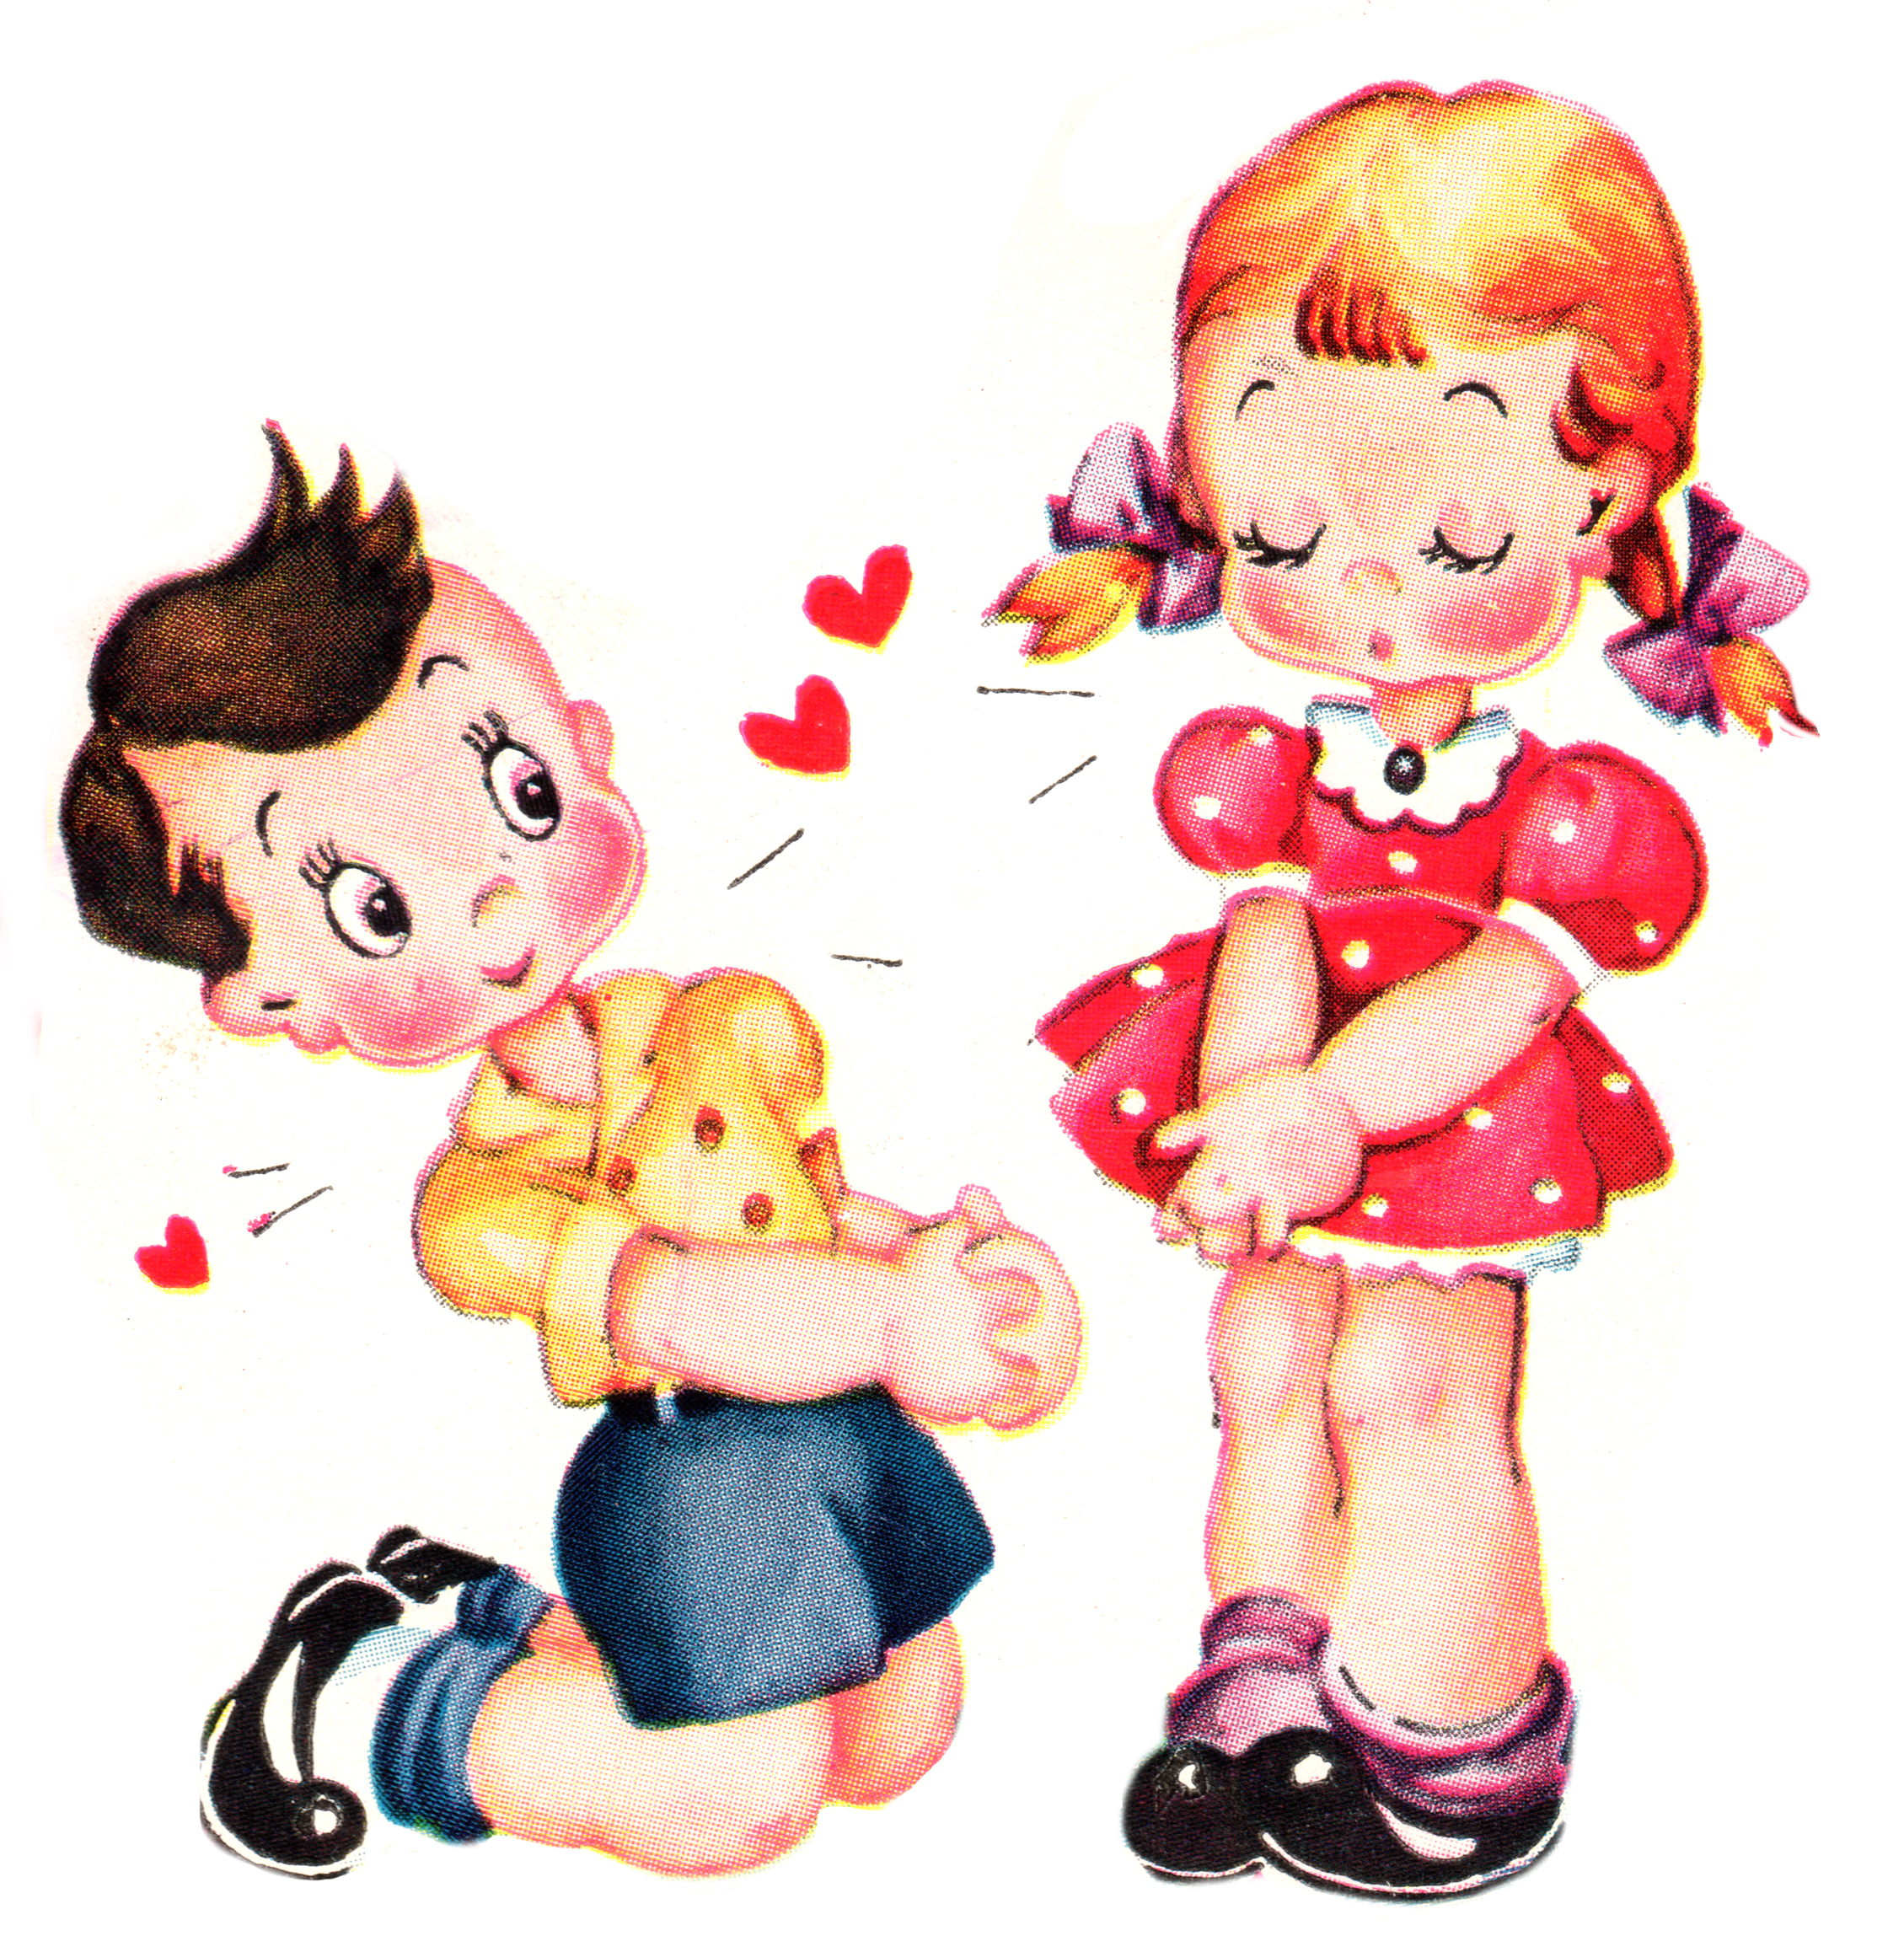 Cute Vintage Valentines Day Clip Art - Free Pretty Things For You - Free Printable Vintage Valentine Clip Art